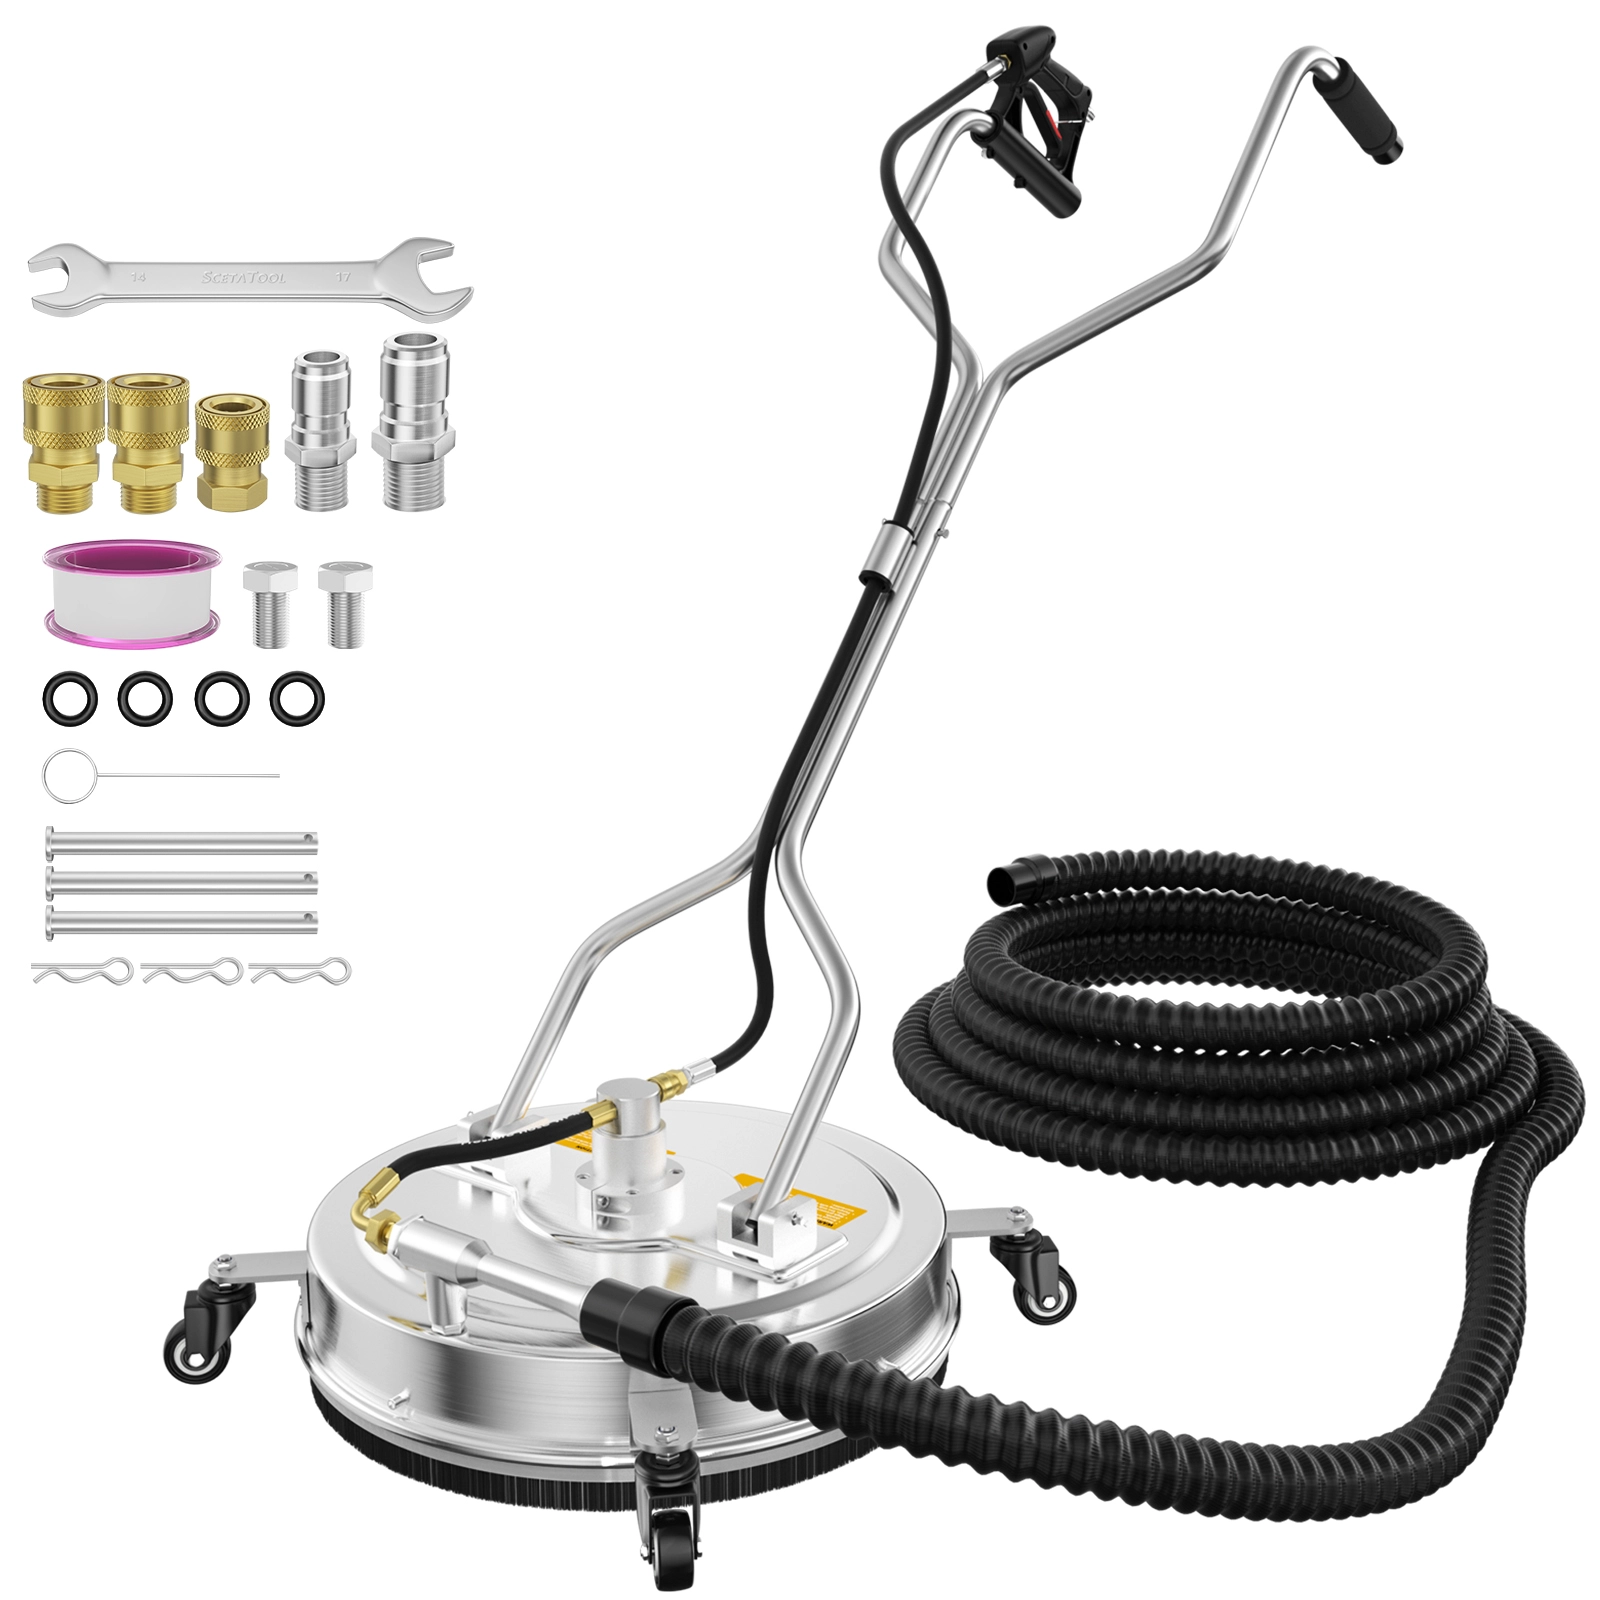 EVEAGE 20 inch Water Recovery Pressure Washer Surface Cleaner